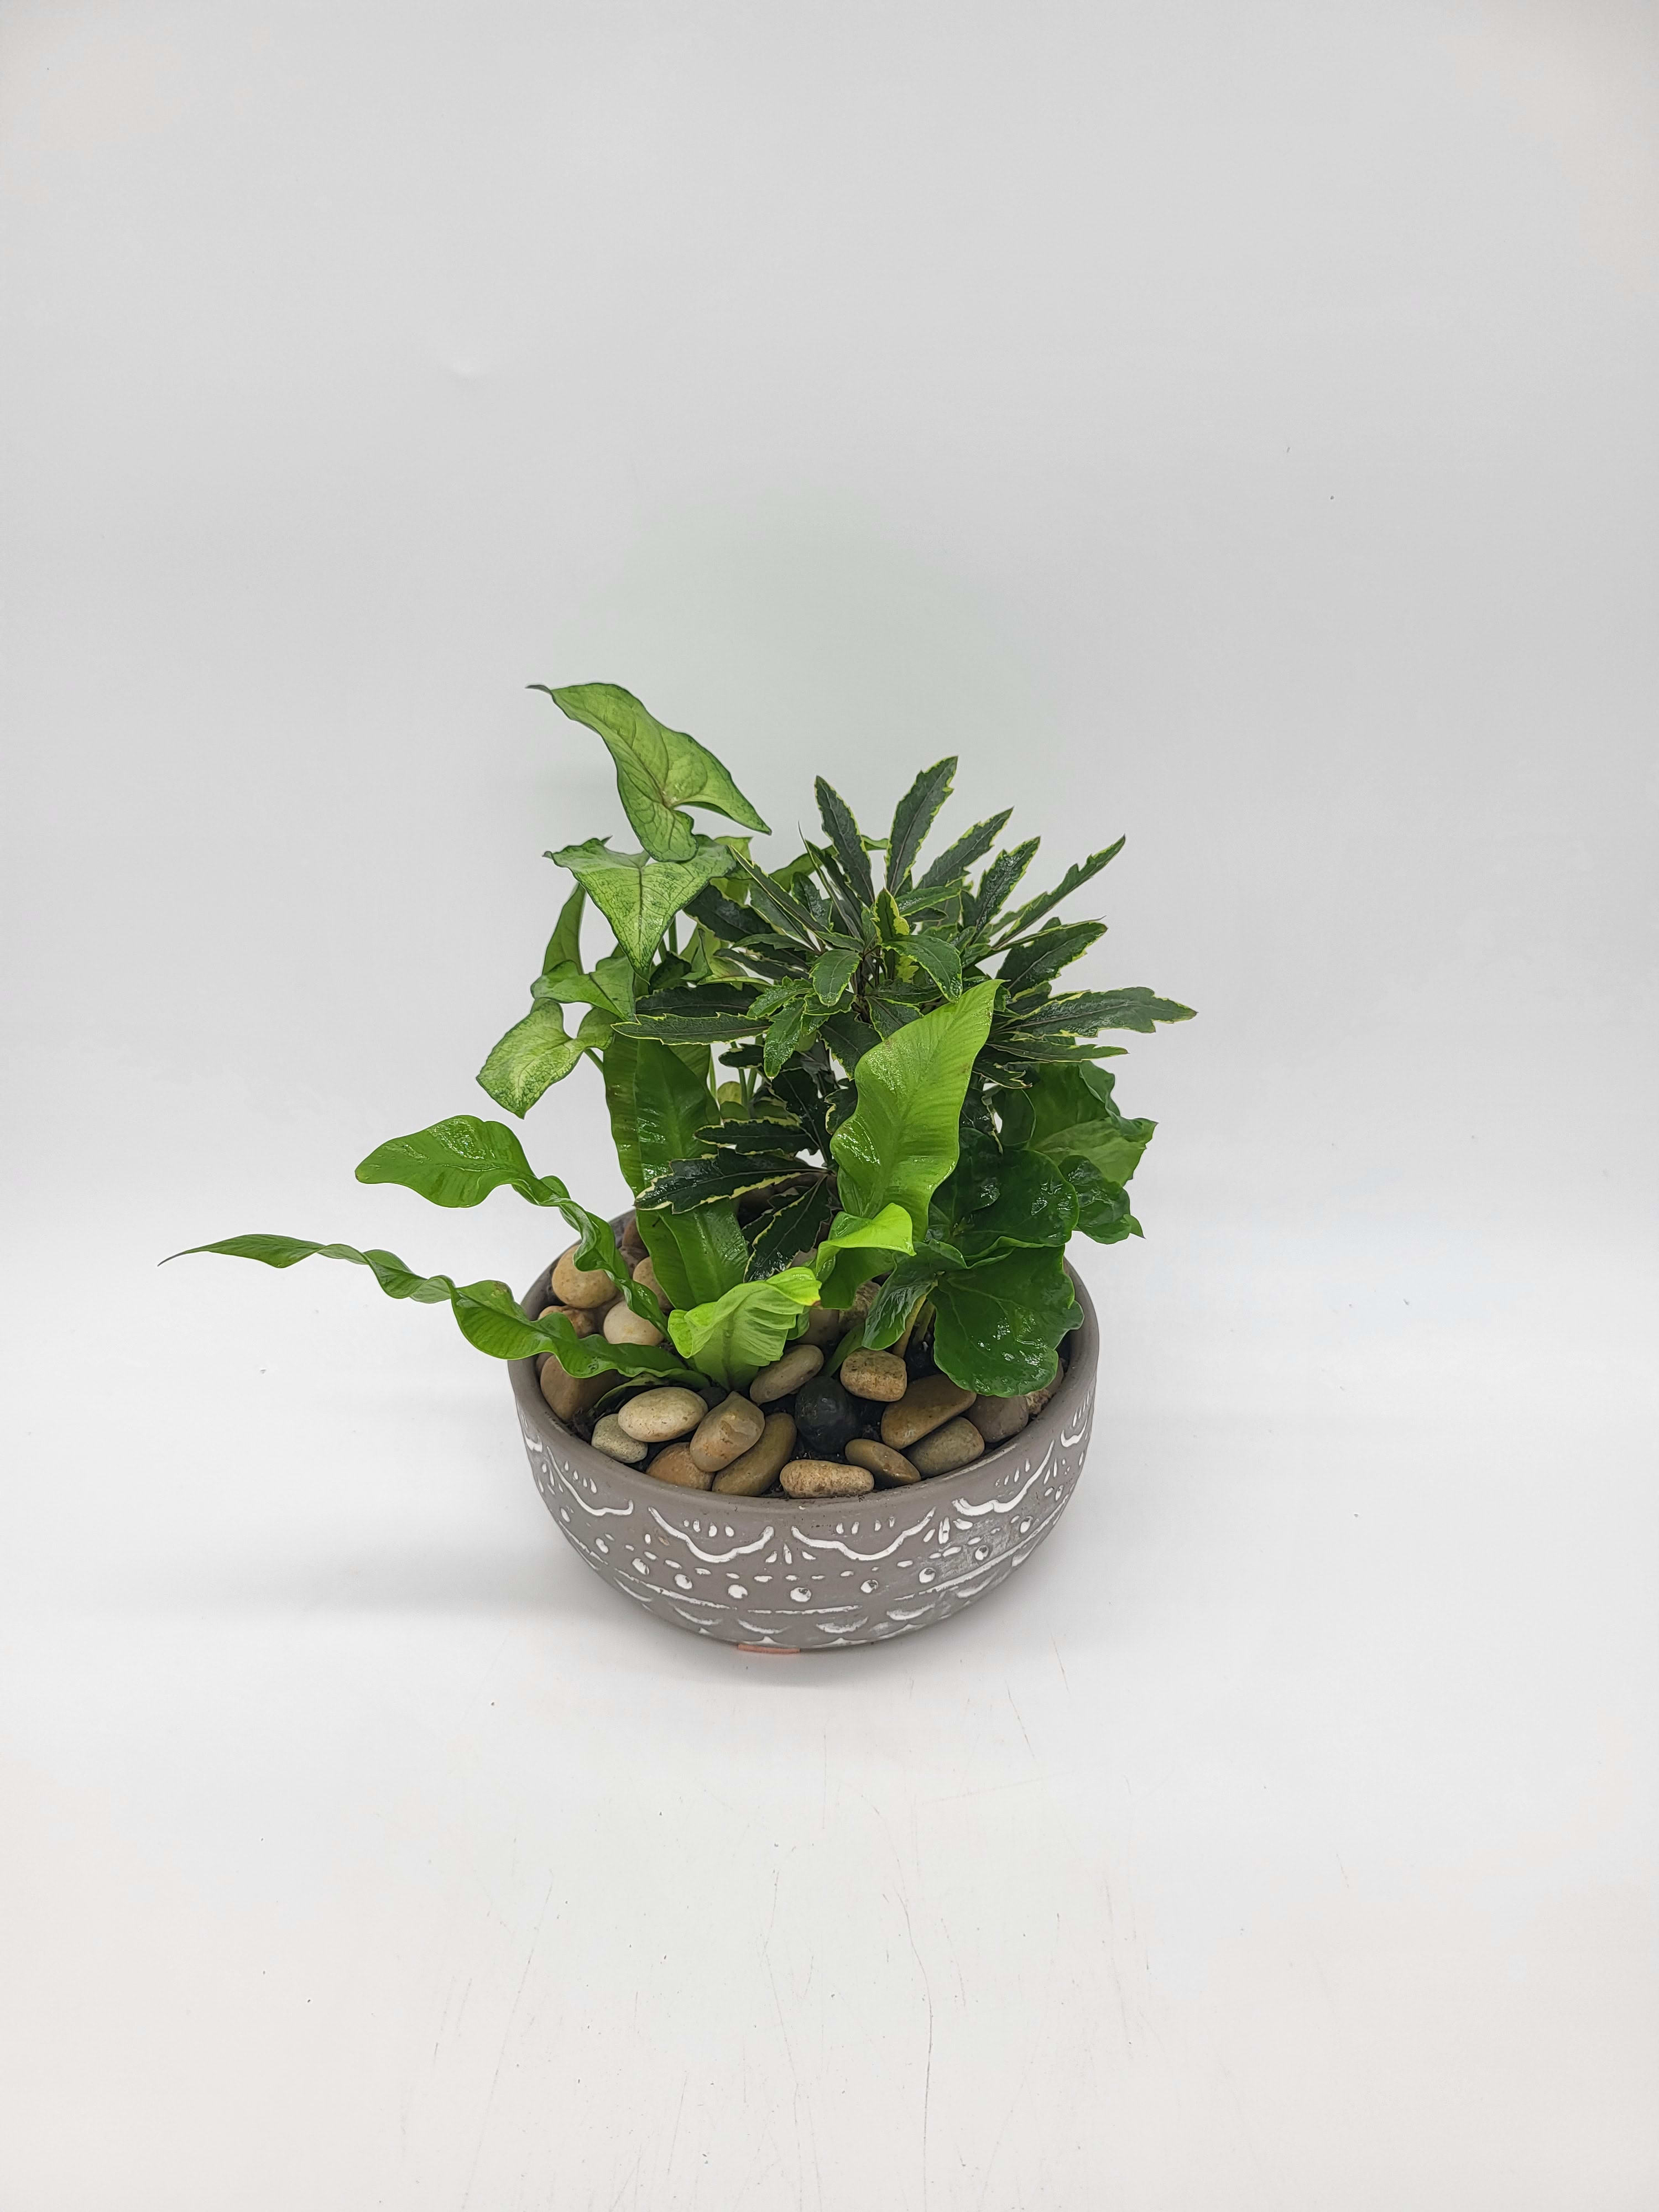 Mini Dish Garden - A small dish garden in a ceramic container! Enjoyable with any occasion.